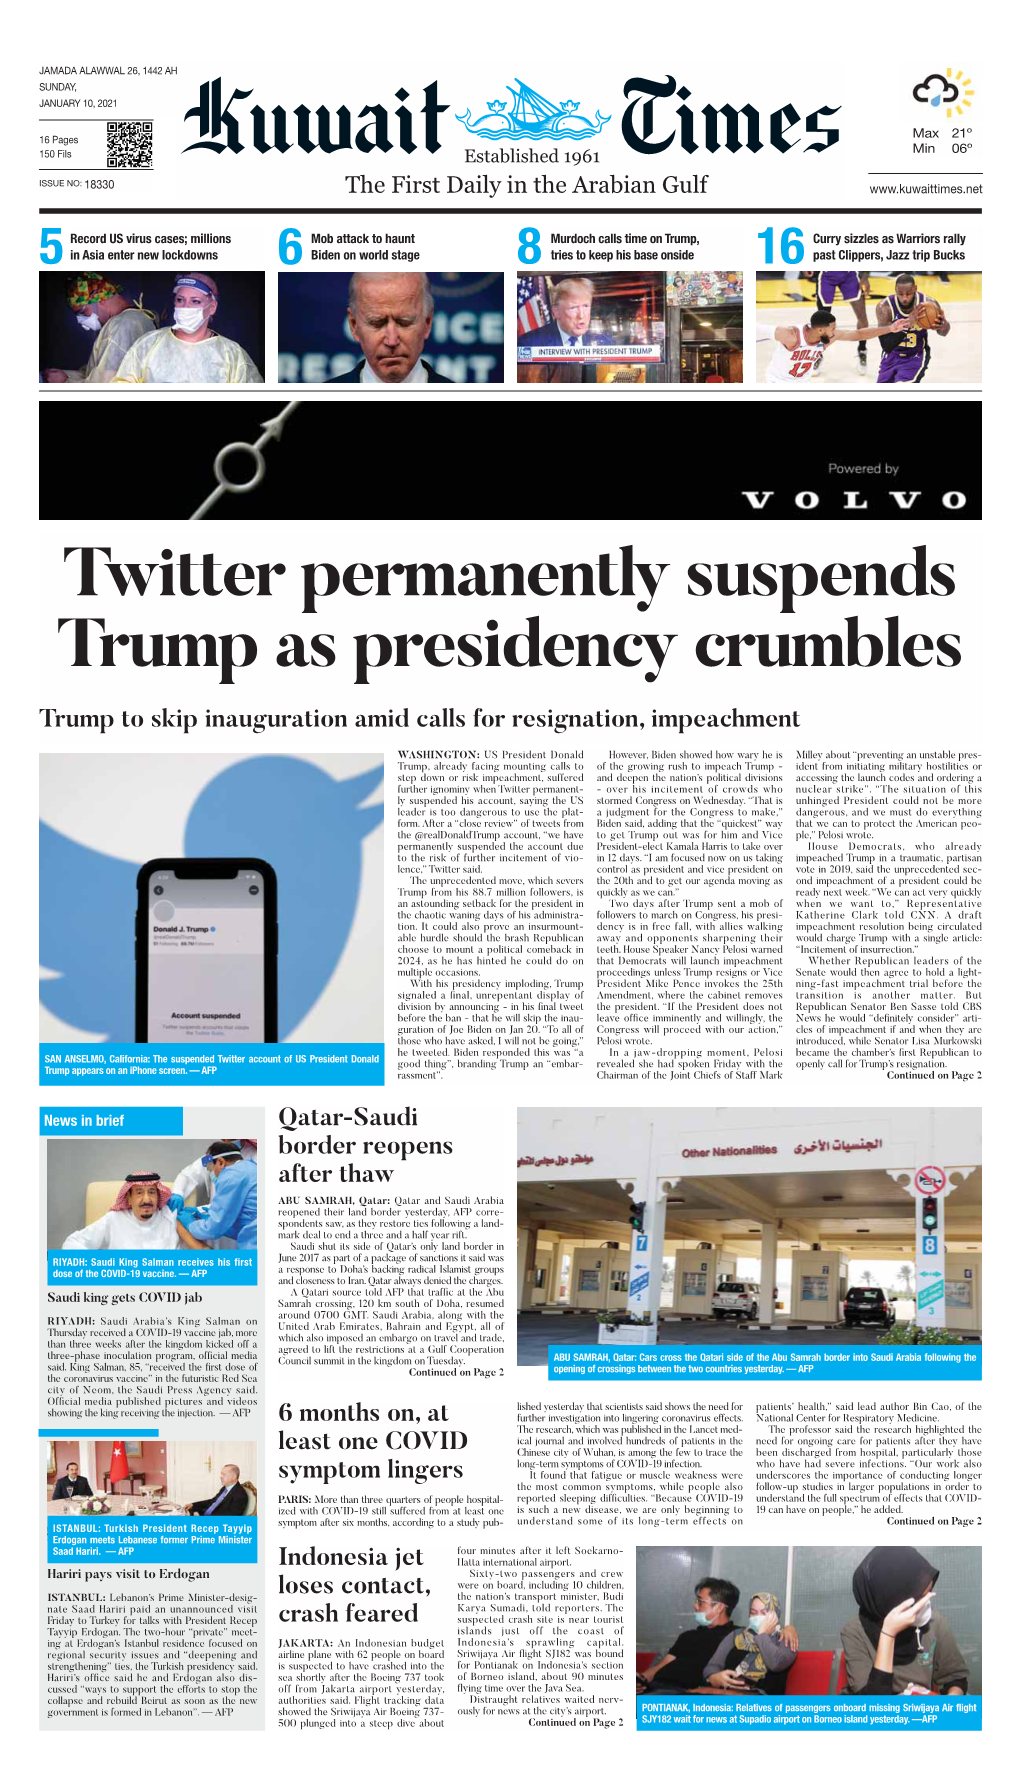 Twitter Permanently Suspends Trump As Presidency Crumbles